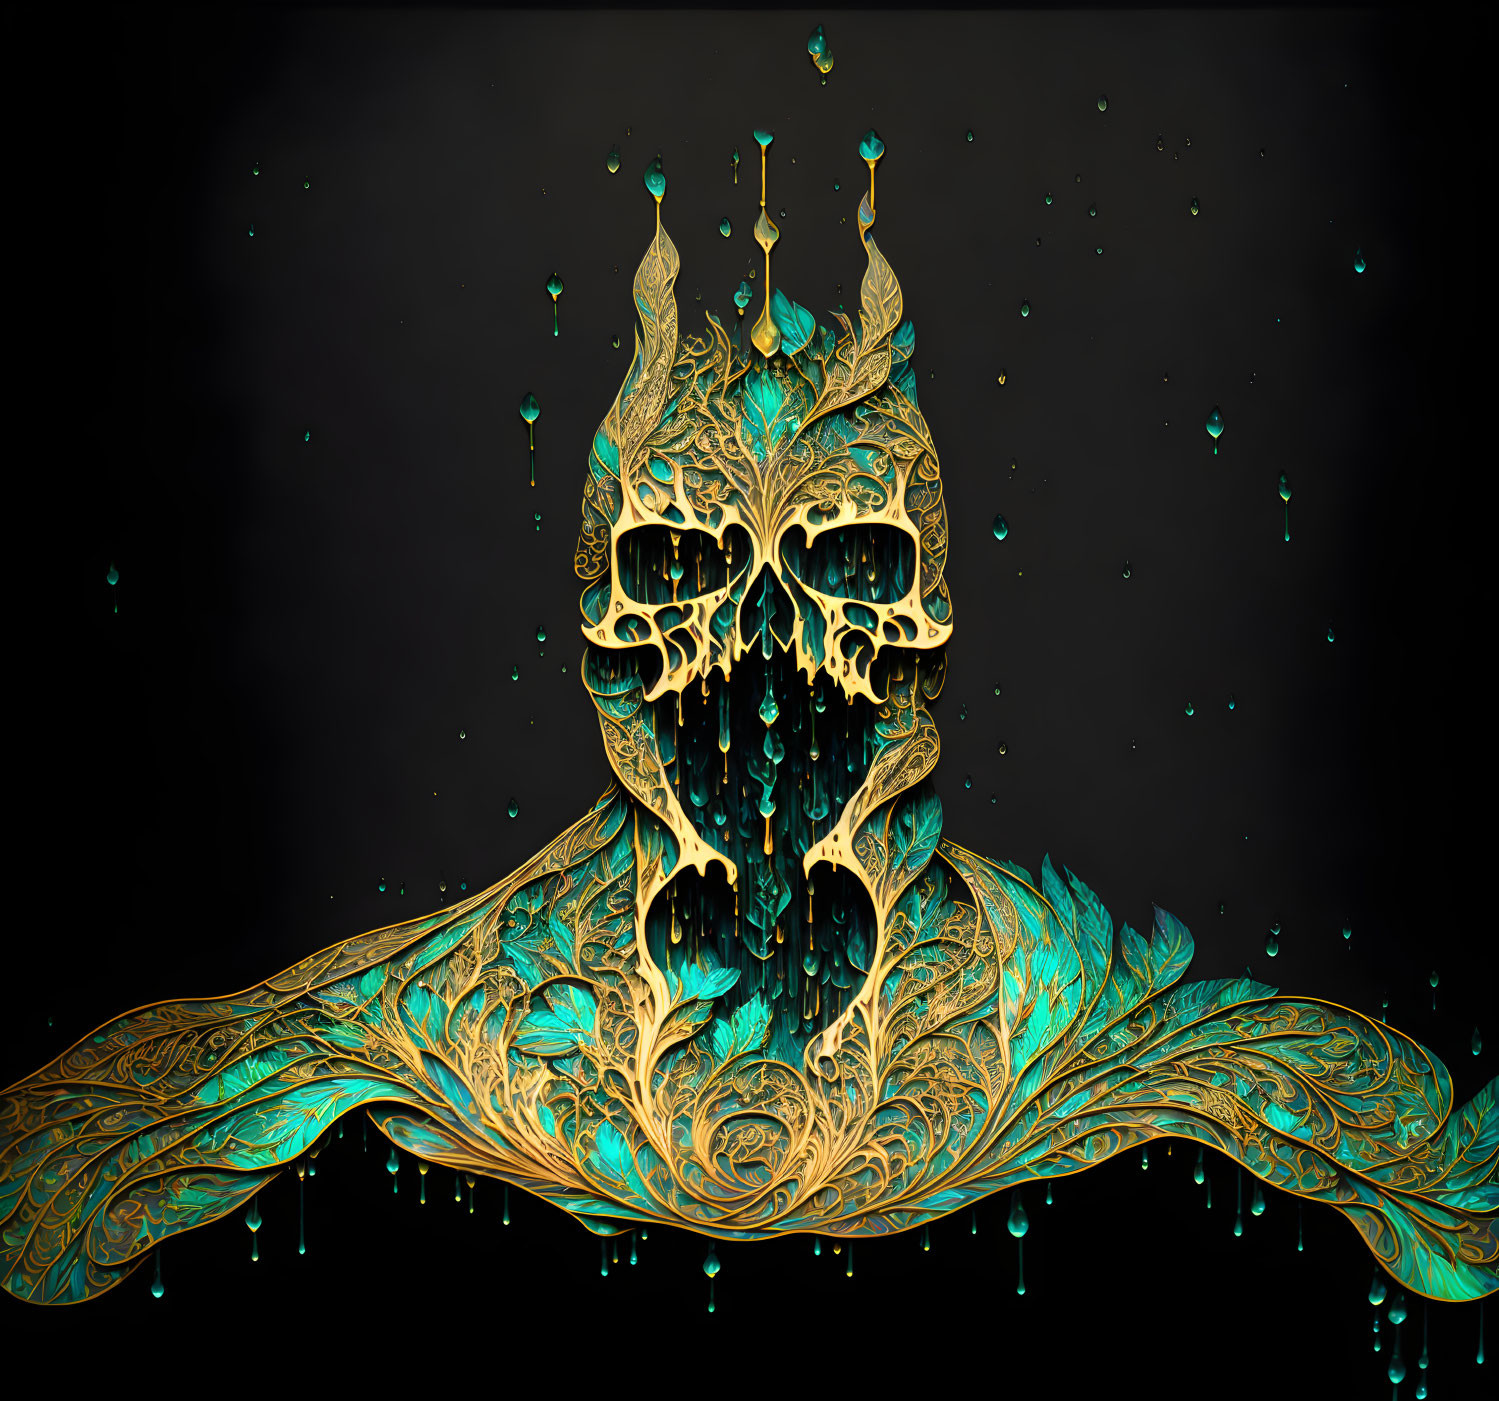 Intricate golden skull with teal highlights on dark background